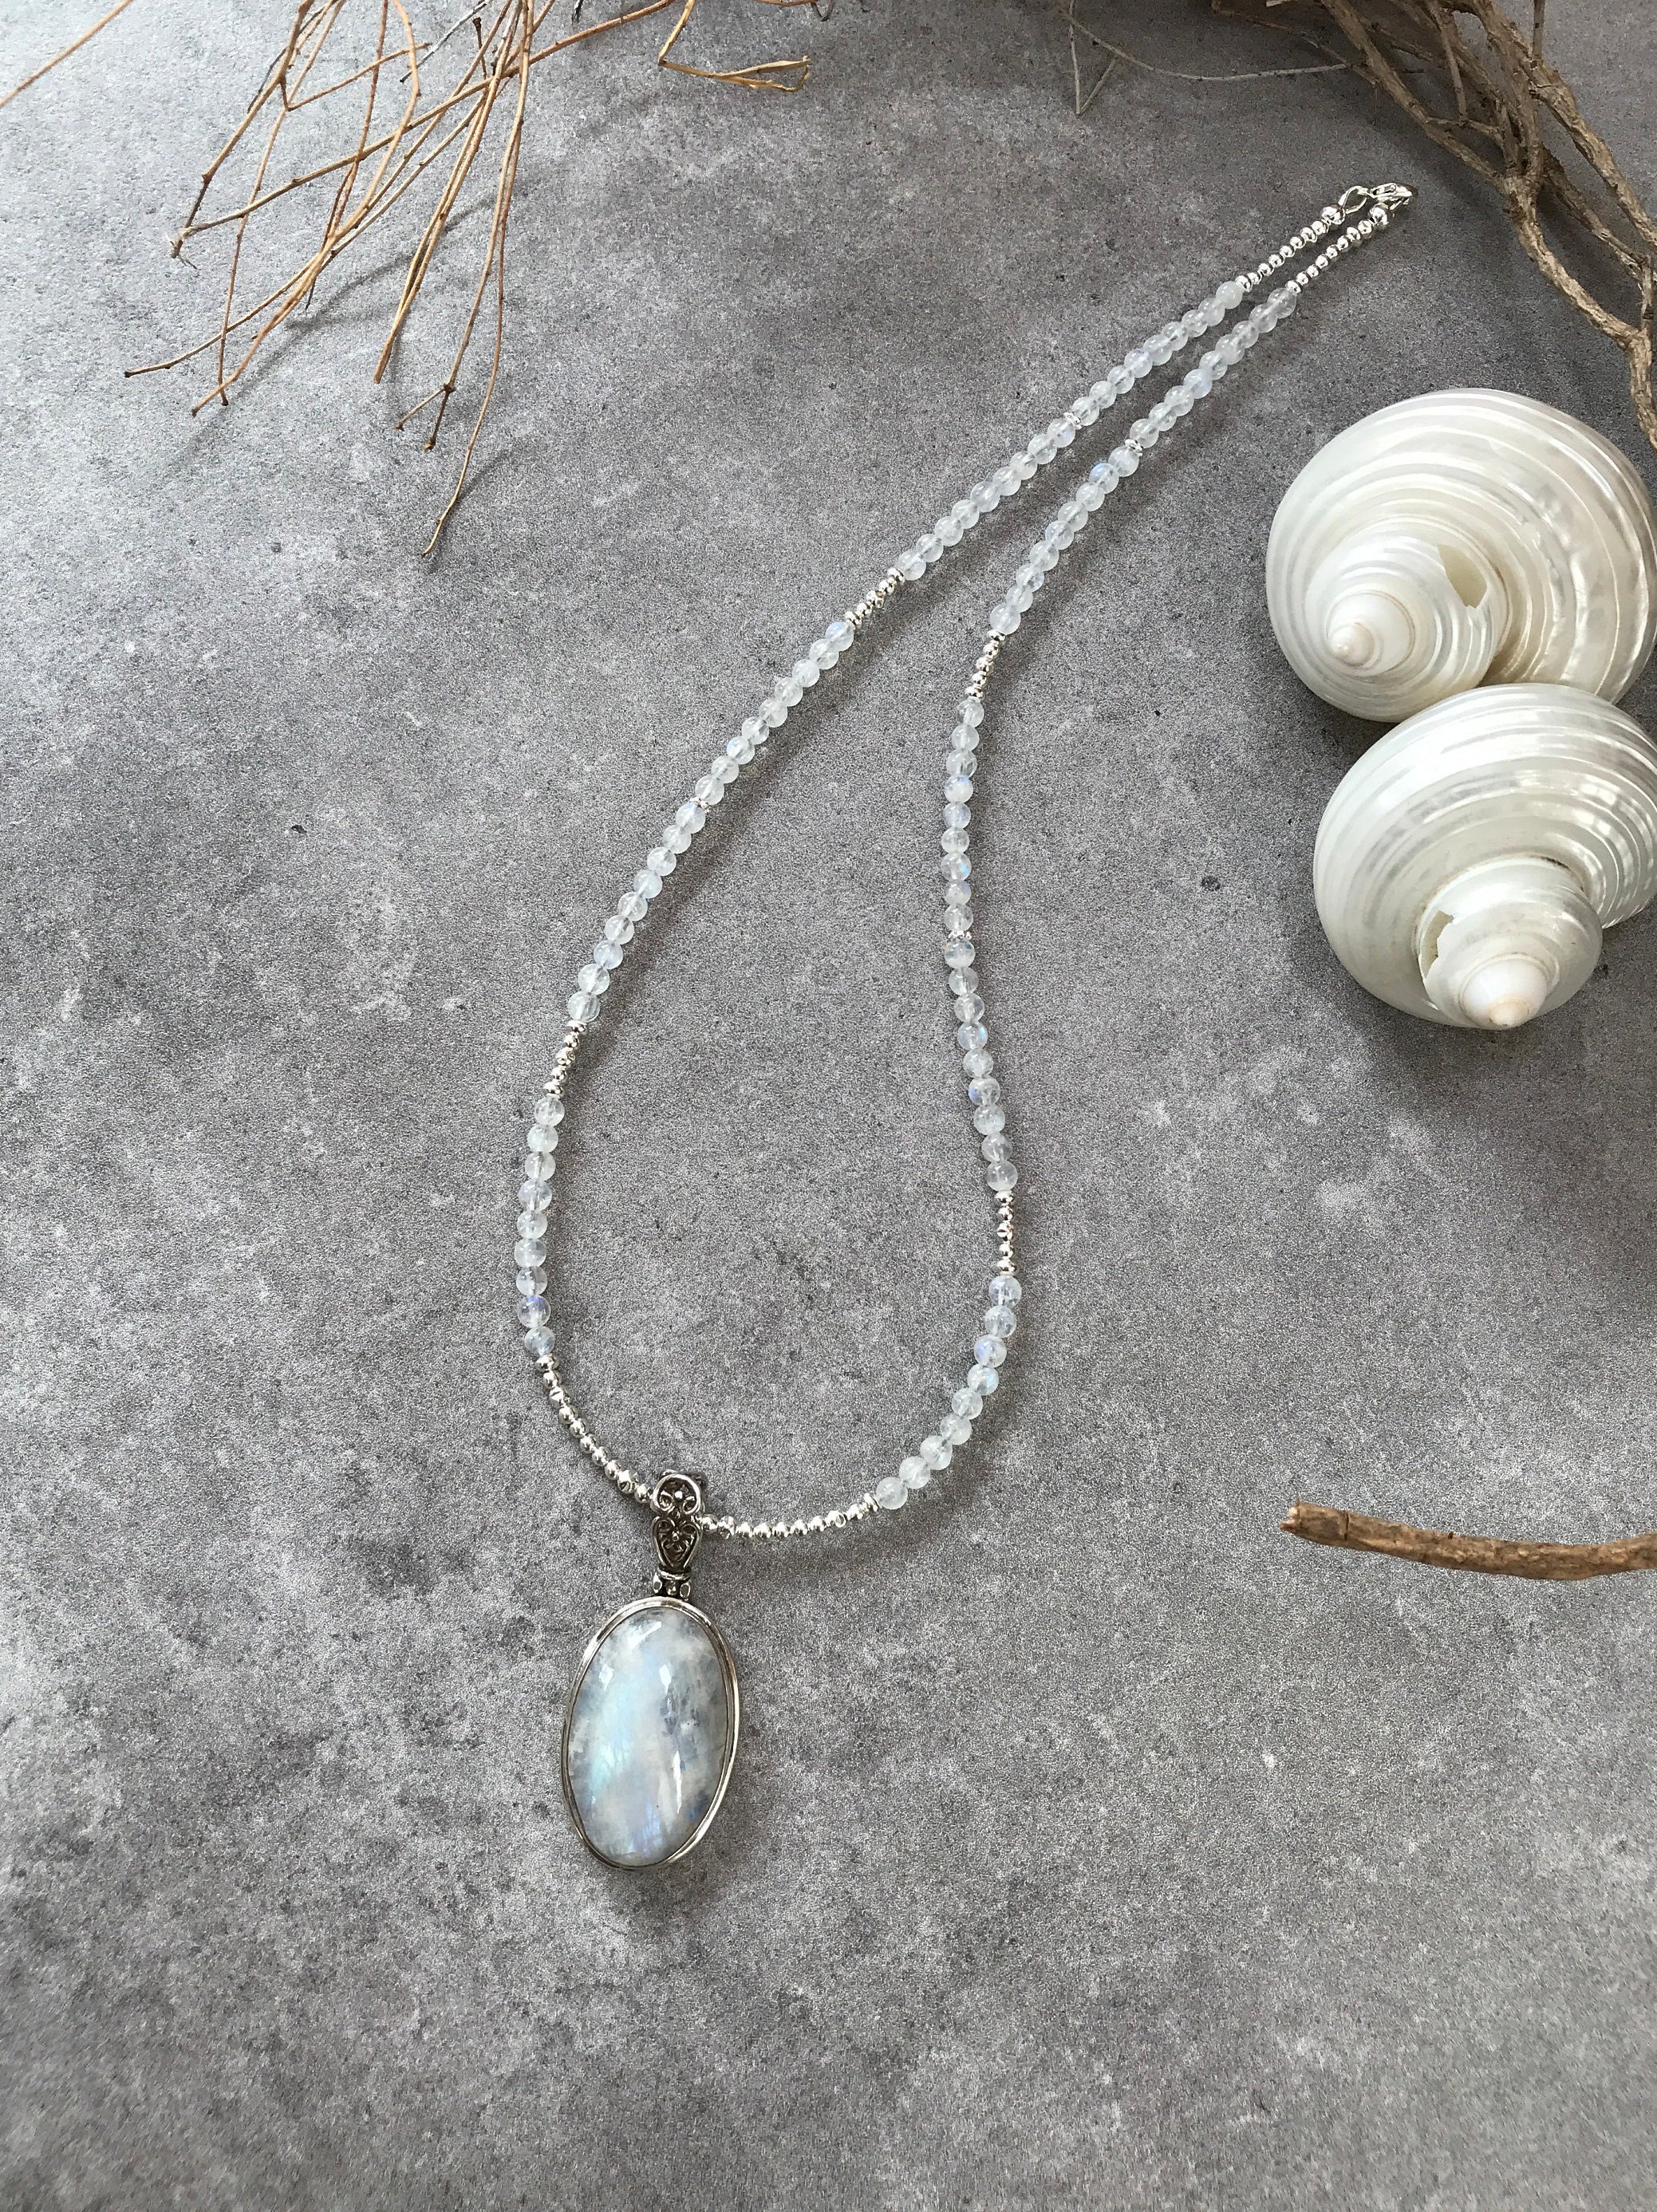 Pendant in white labradorite with necklace in labradorite white (AAA ...